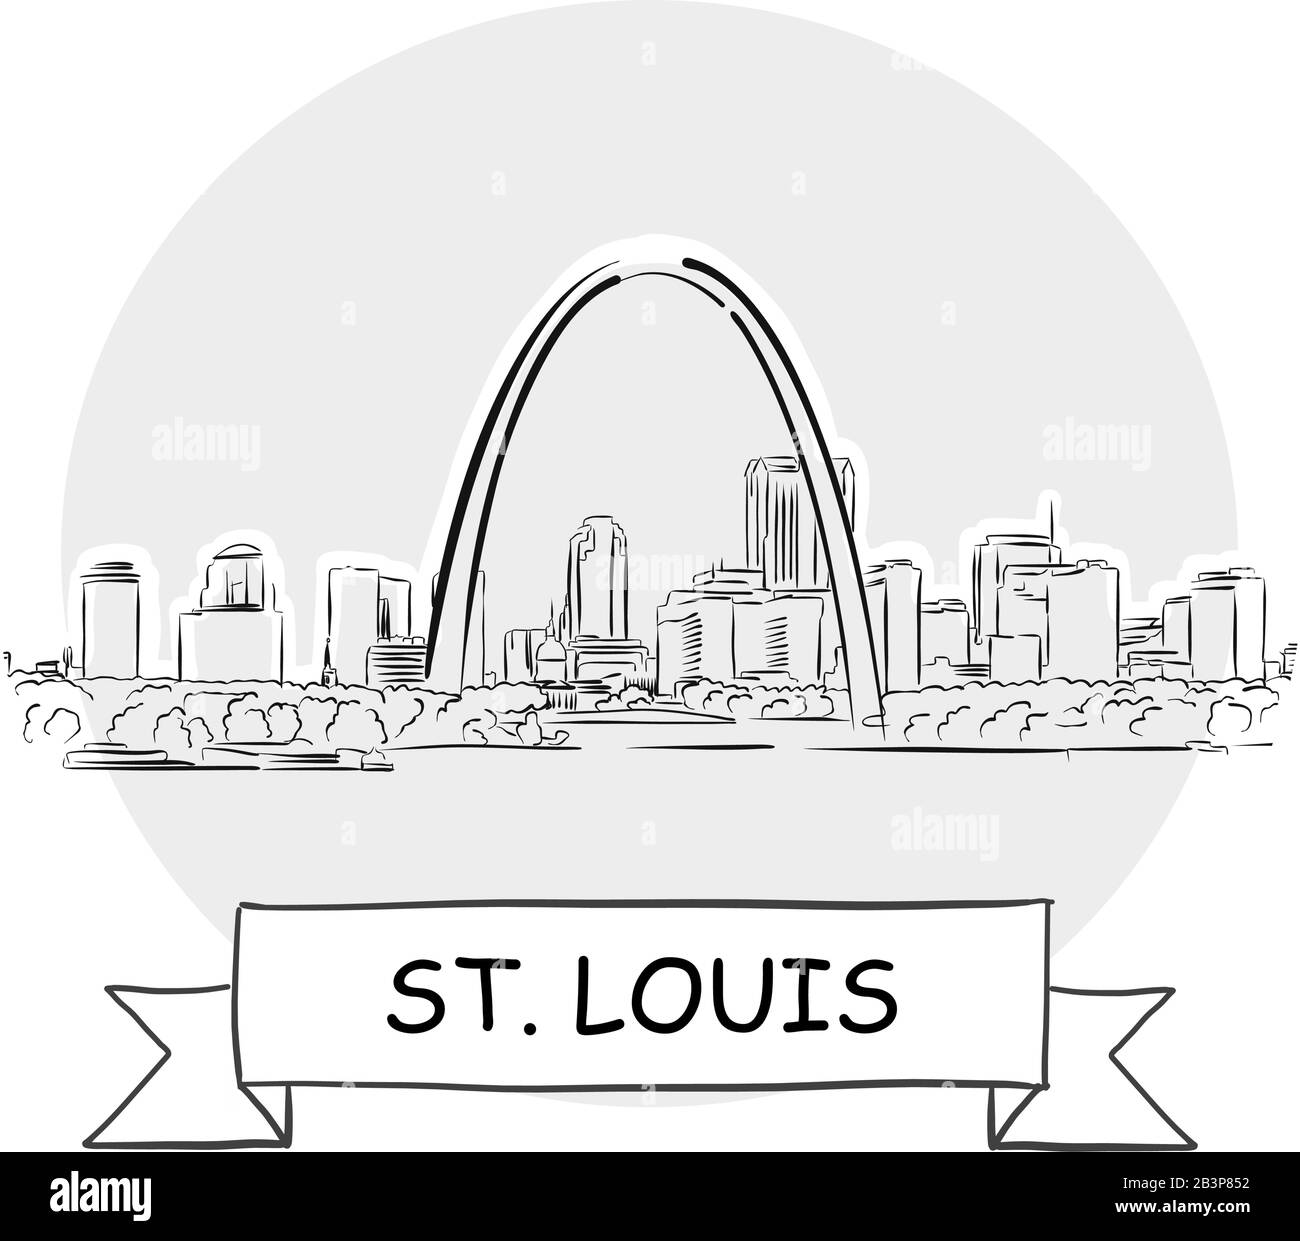 St. Louis Cityscape Vector Sign. Line Art Illustration with Ribbon and Title. Stock Vector